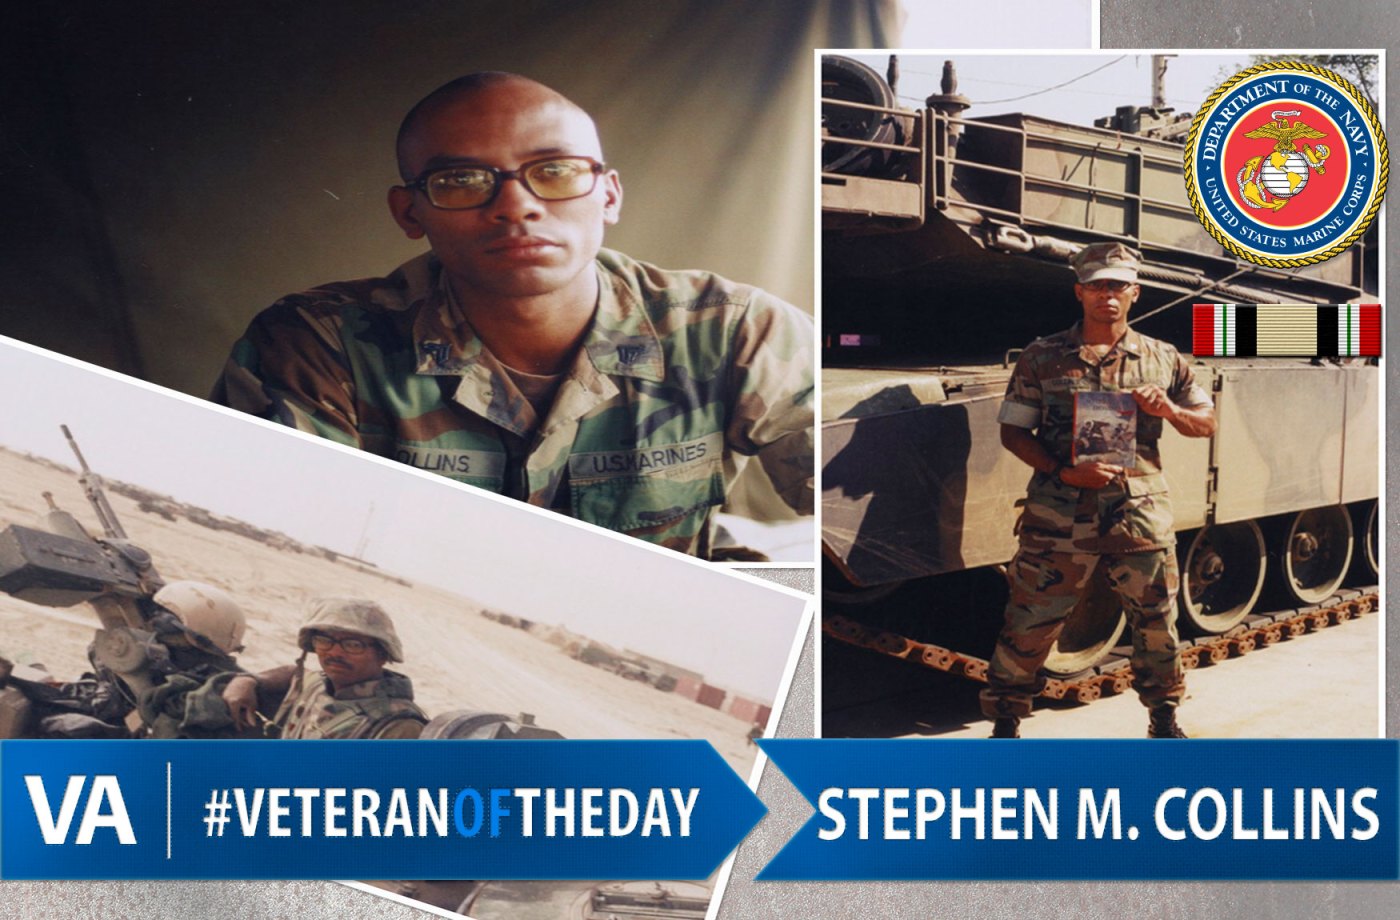 Stephen M Collins - Veteran of the Day